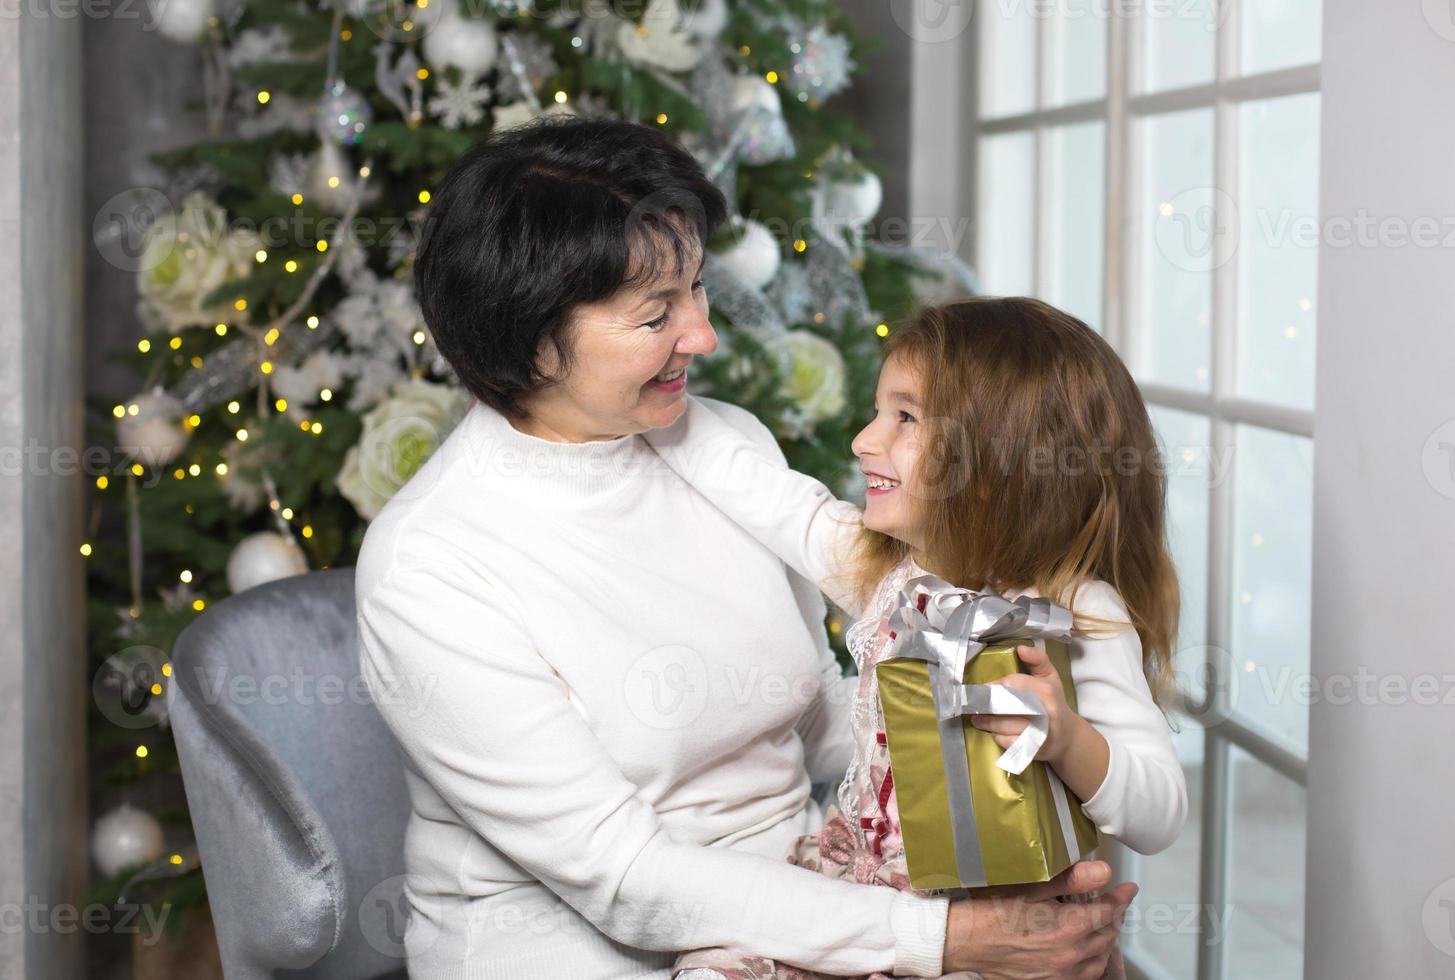 Grandmother with a little girl on the background of Christmas decorations and a large window. Family holiday, emotions, gift box. Granddaughter on granny's lap. New Year photo